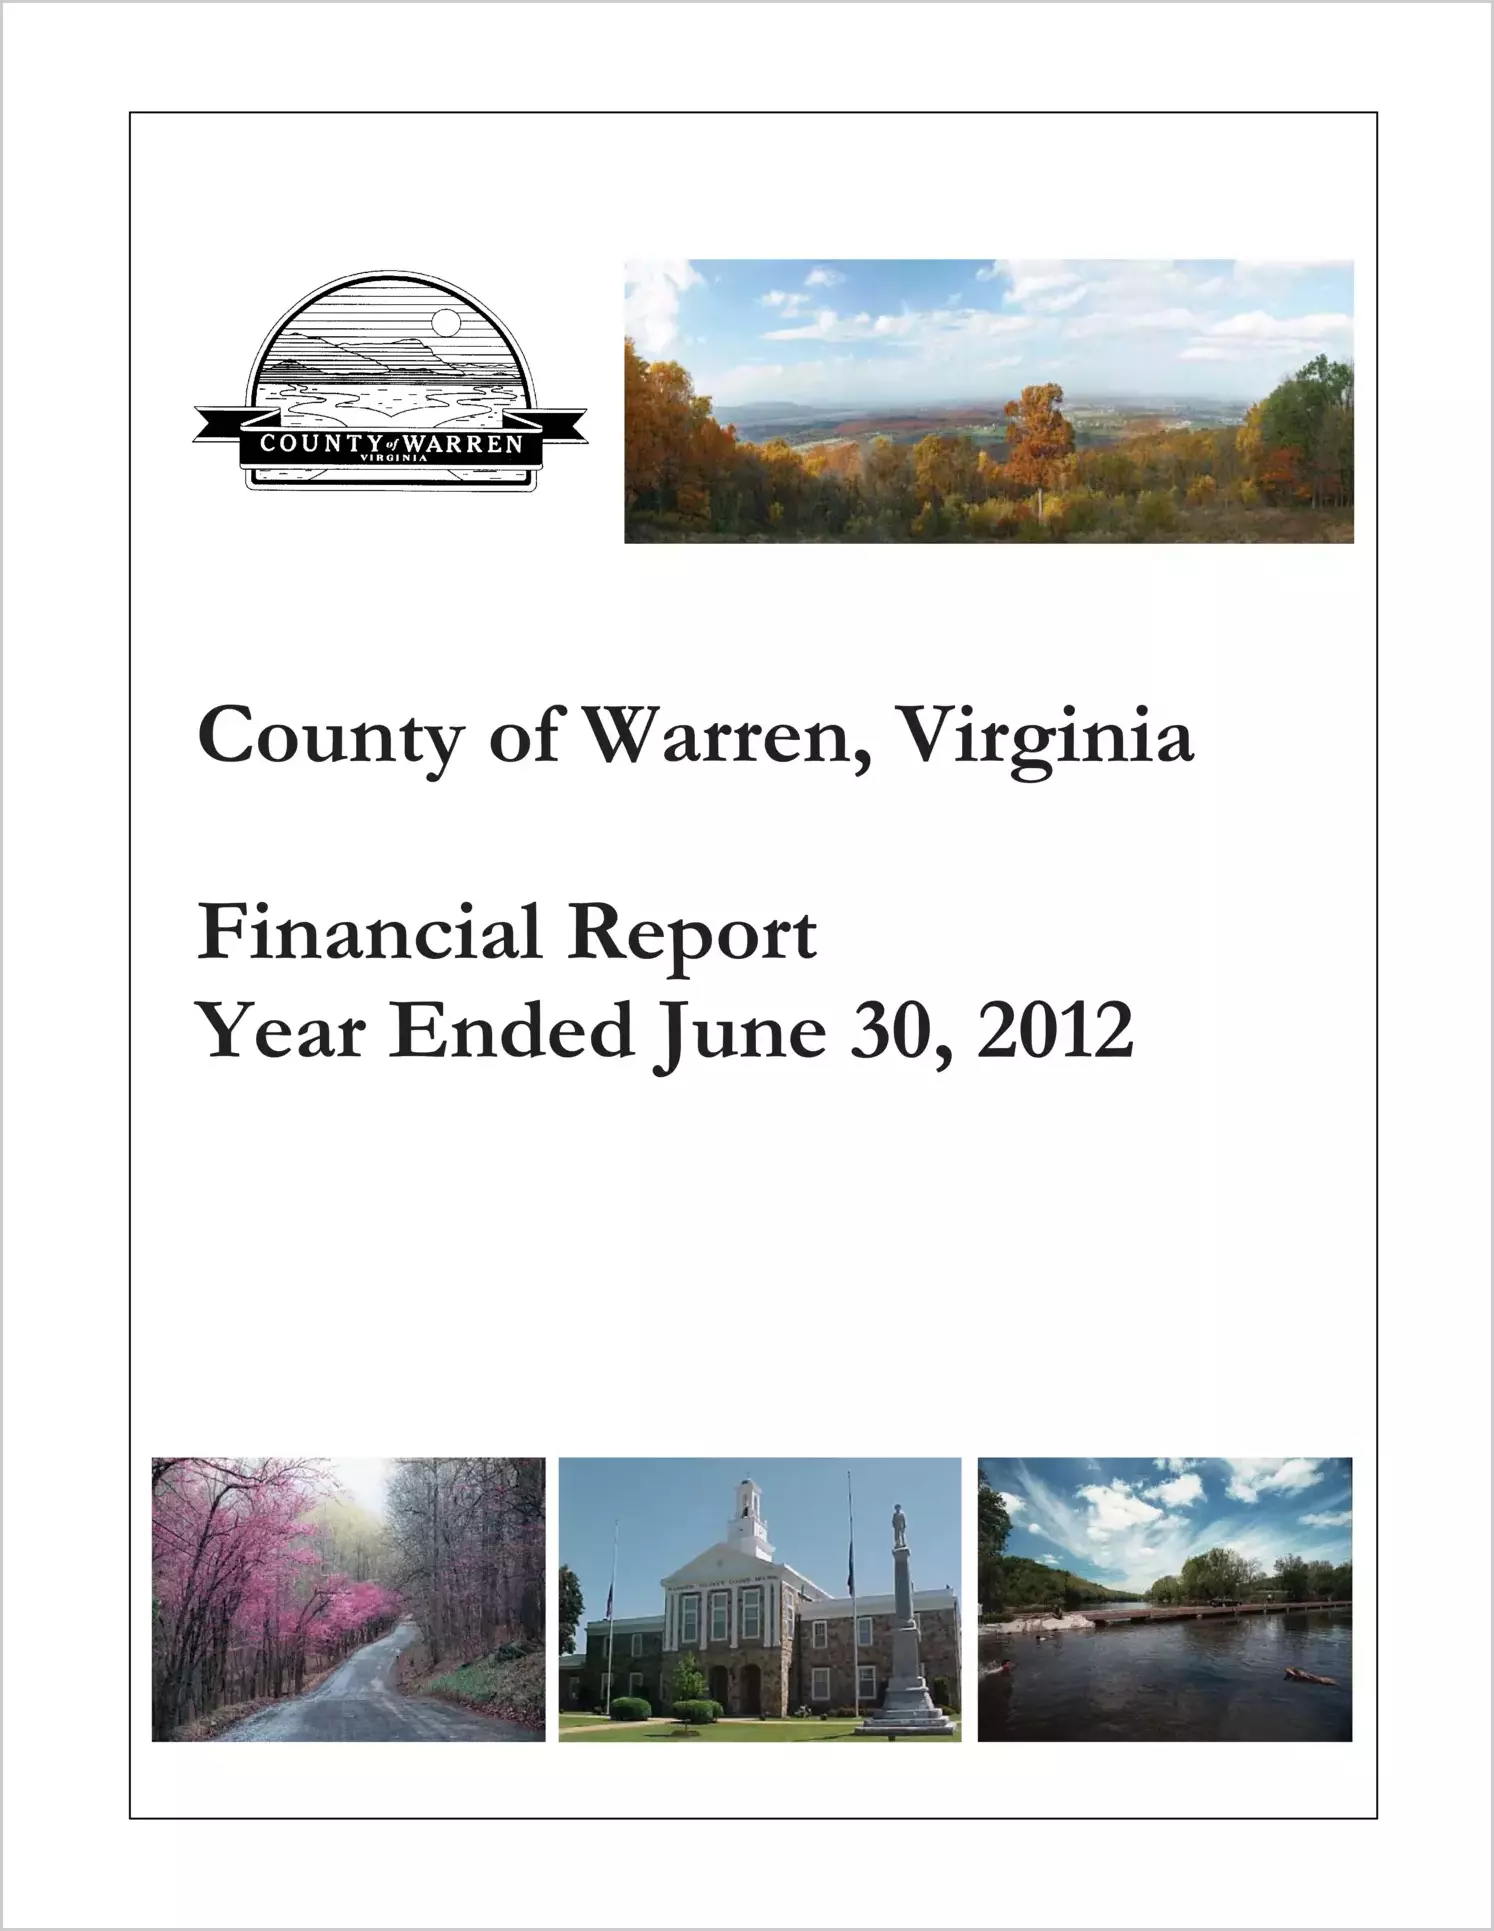 2012 Annual Financial Report for County of Warren